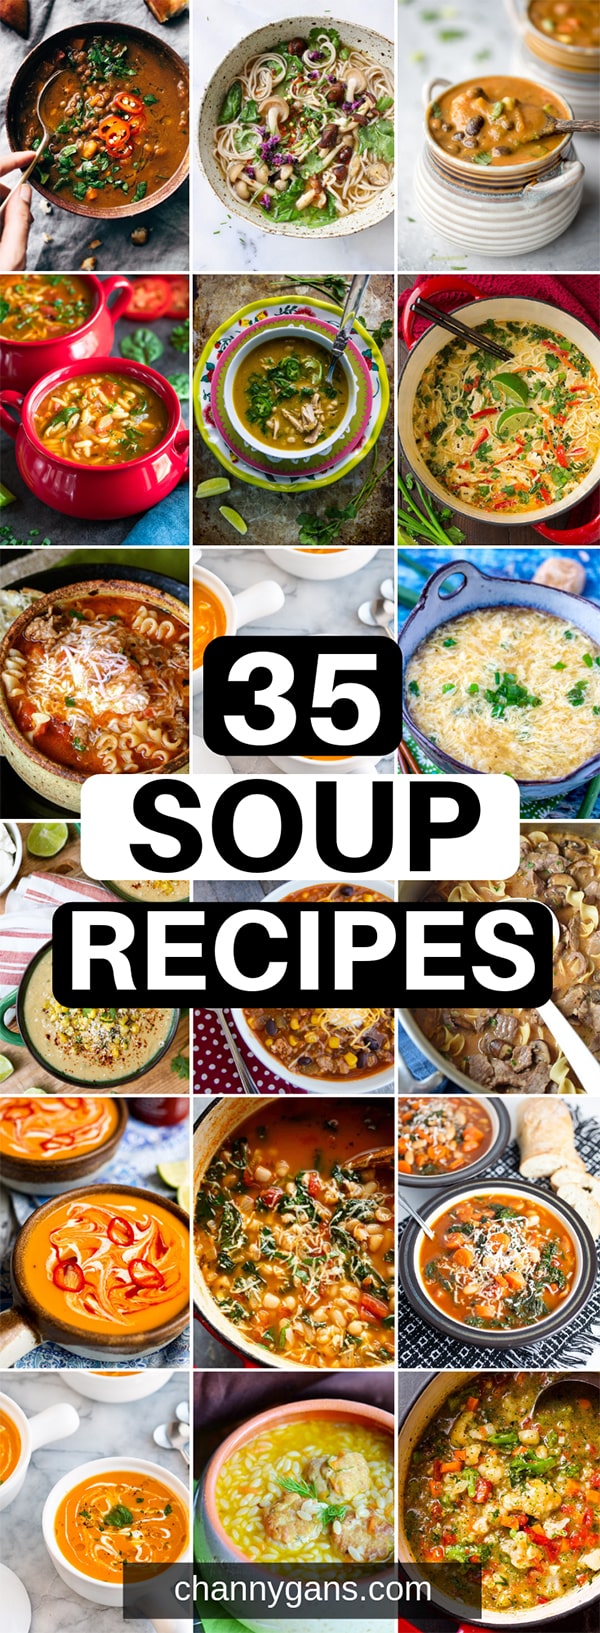 What better way is there to warm up than with yummy soup? Stay warm and cozy on cold nights with these 35 delicious soup recipes.